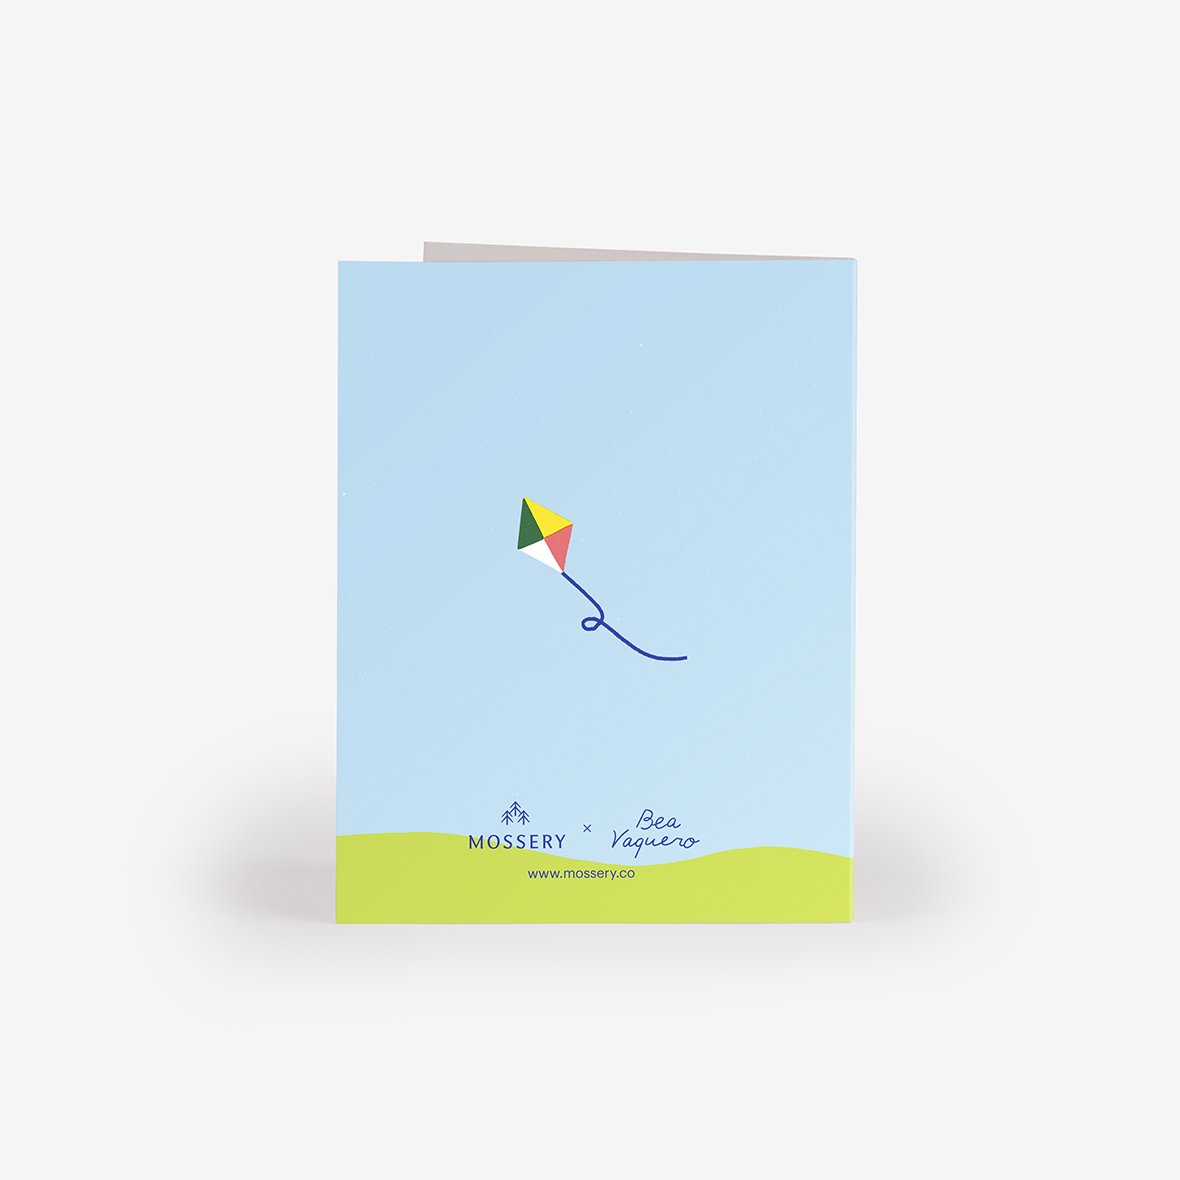 Running in the Wind Greeting Card